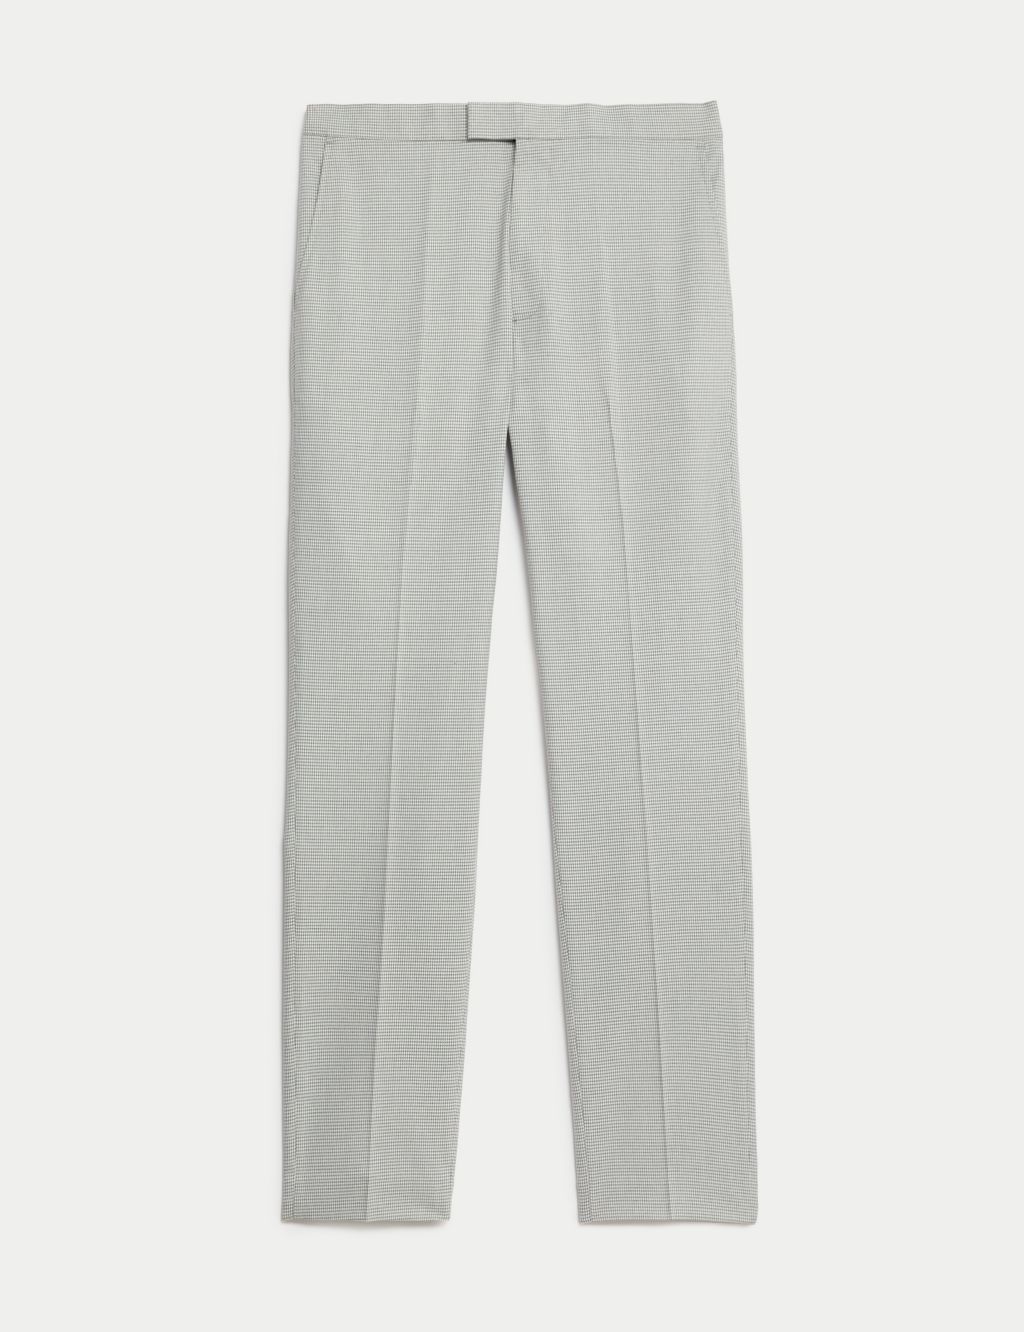 Puppytooth Elasticated Stretch Suit Trousers 5 of 7